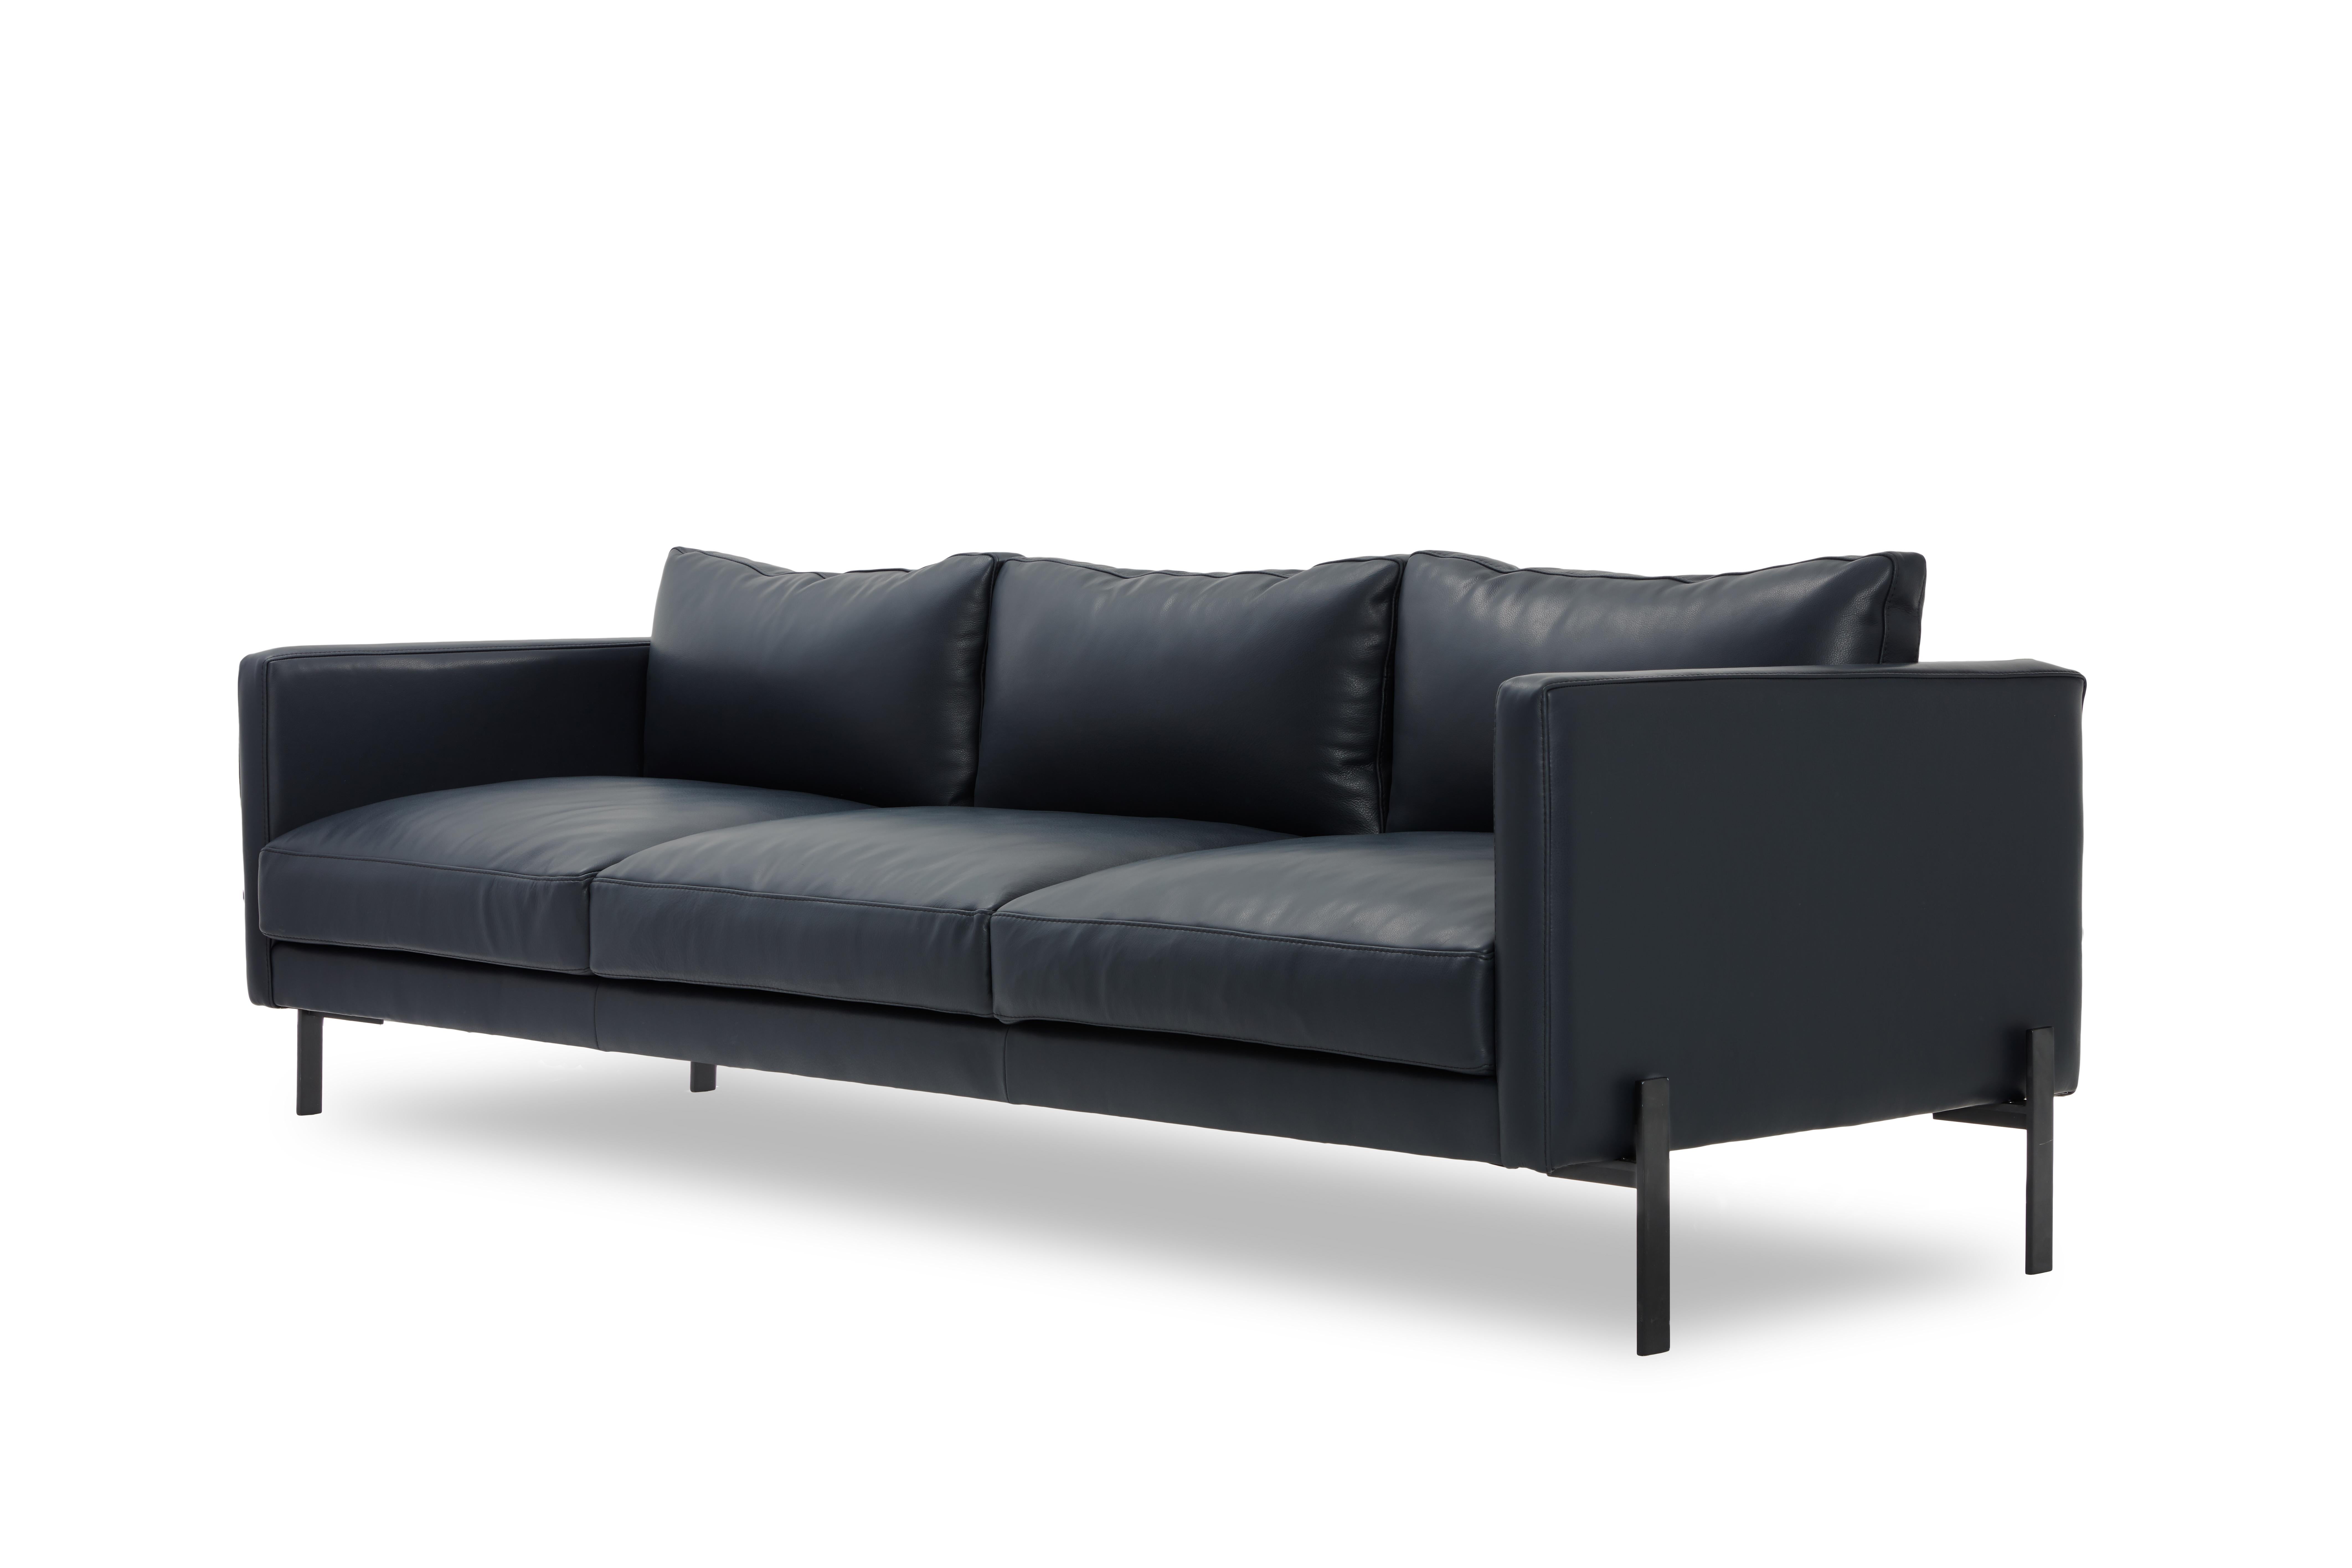 The Truss sofa combines an elegant, yet practical design with a lean, refined profile that spares no expense to comfort. Pictured above in midnight leather, the Truss line is available in a range of carefully-chosen upholstery options including